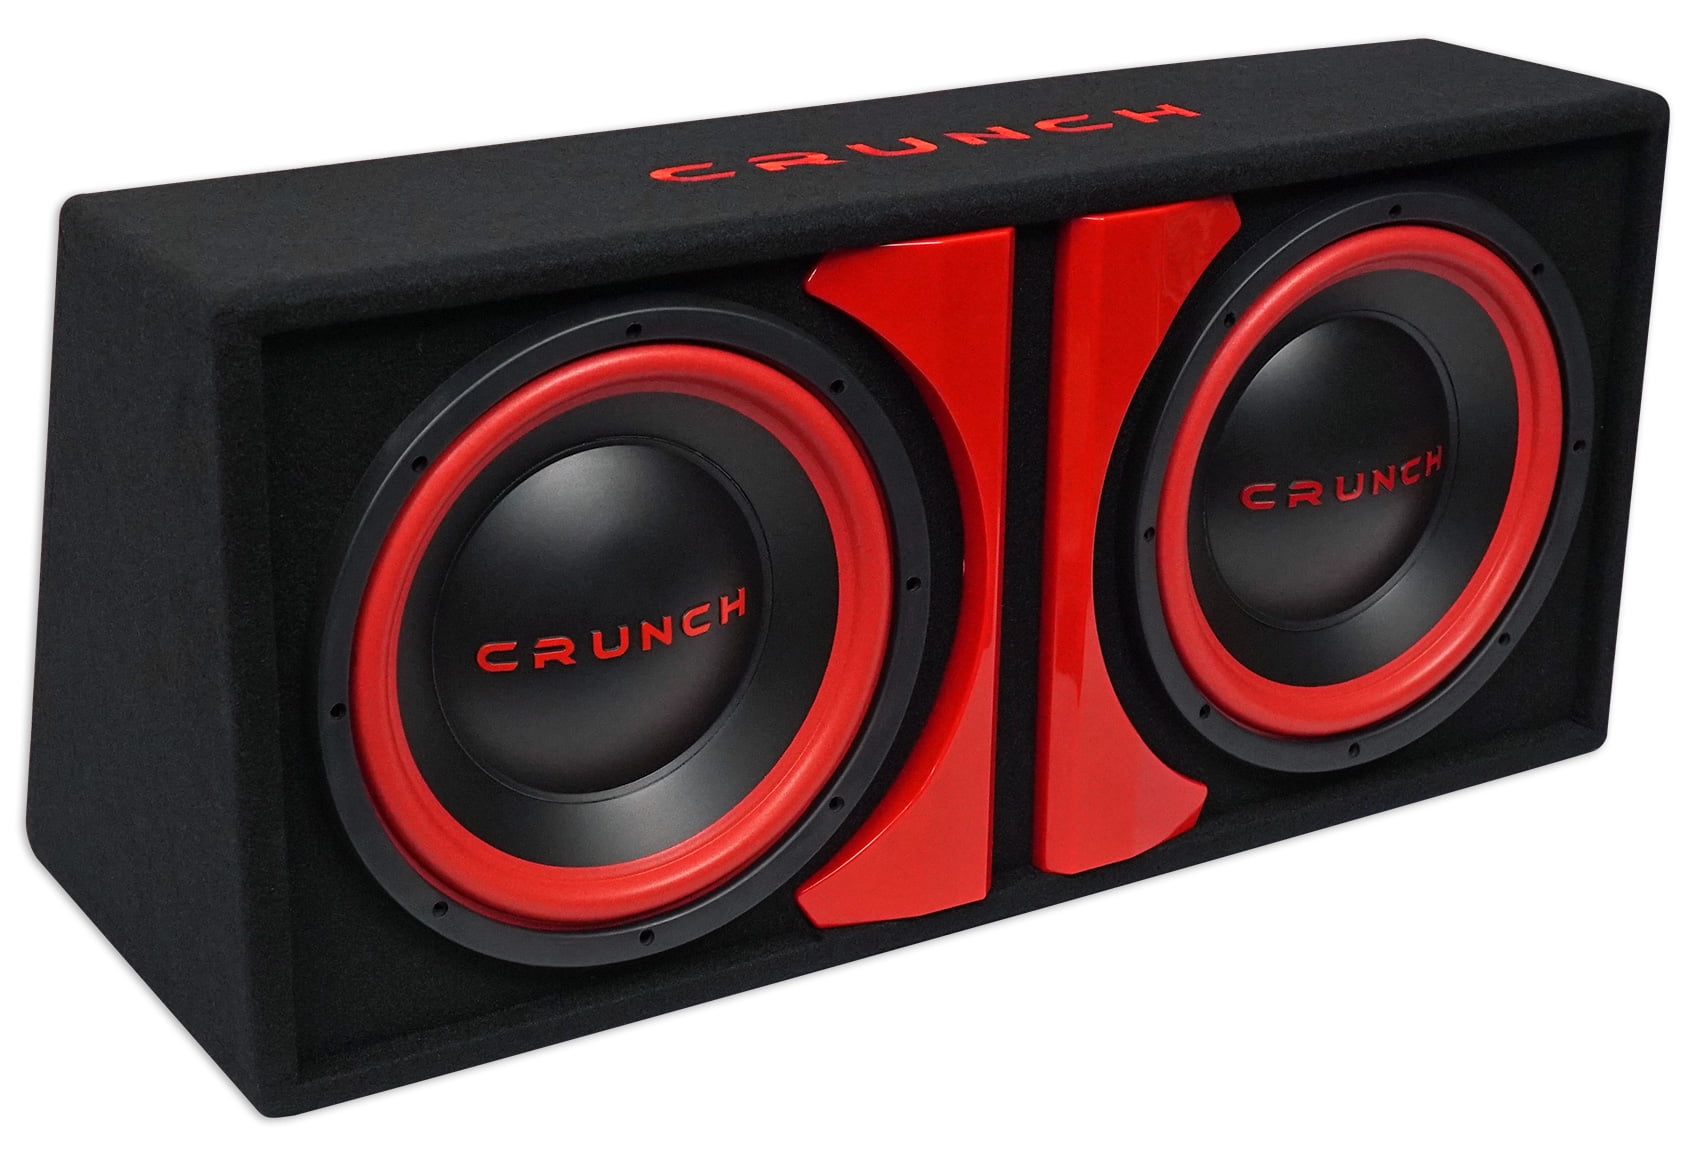 12 inch crunch subwoofers